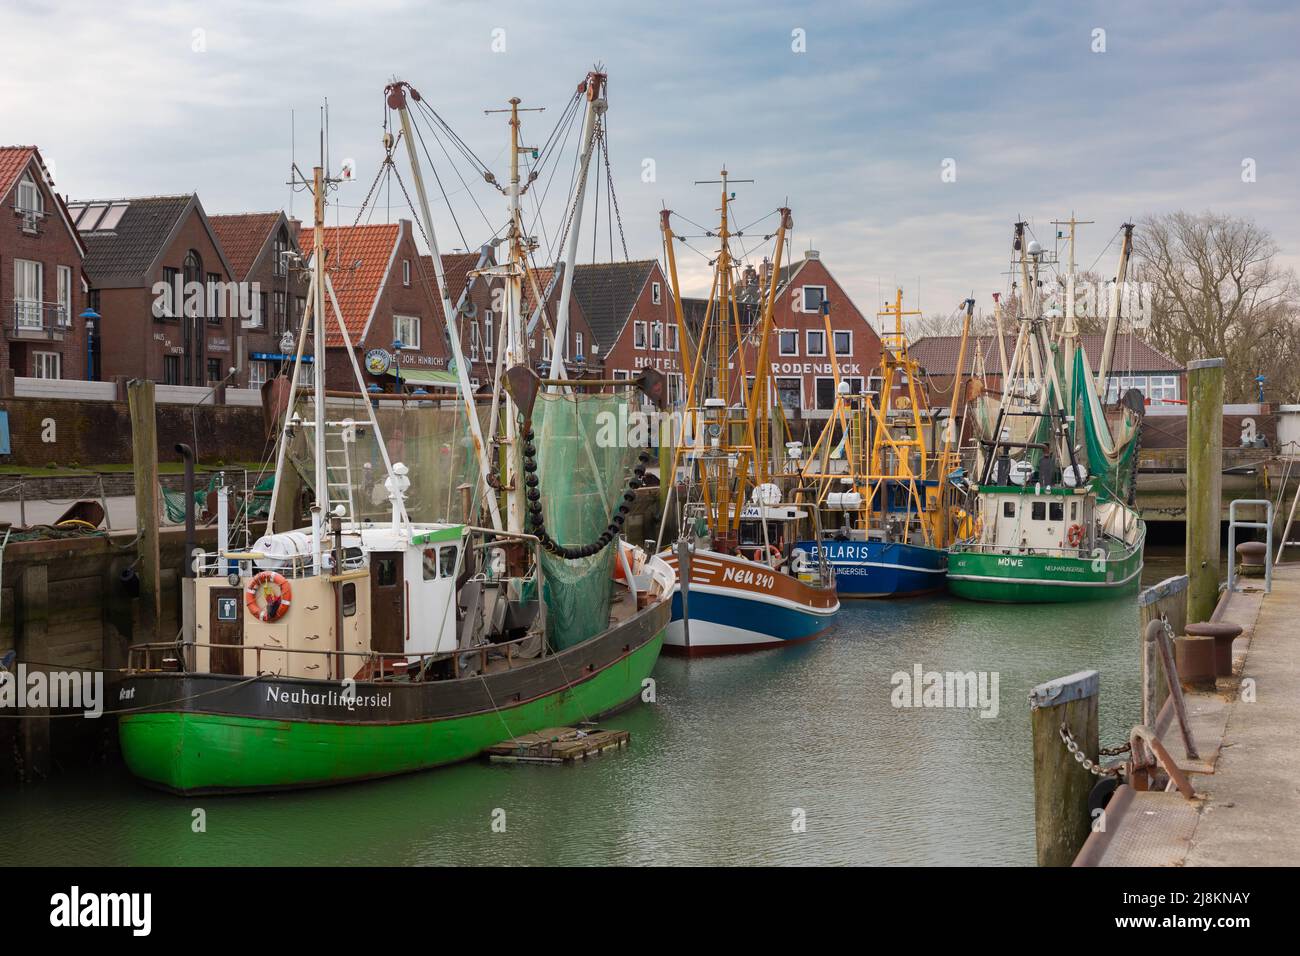 Typical fishing boats in Neuharlingersiel harbour, Germany Stock Photo